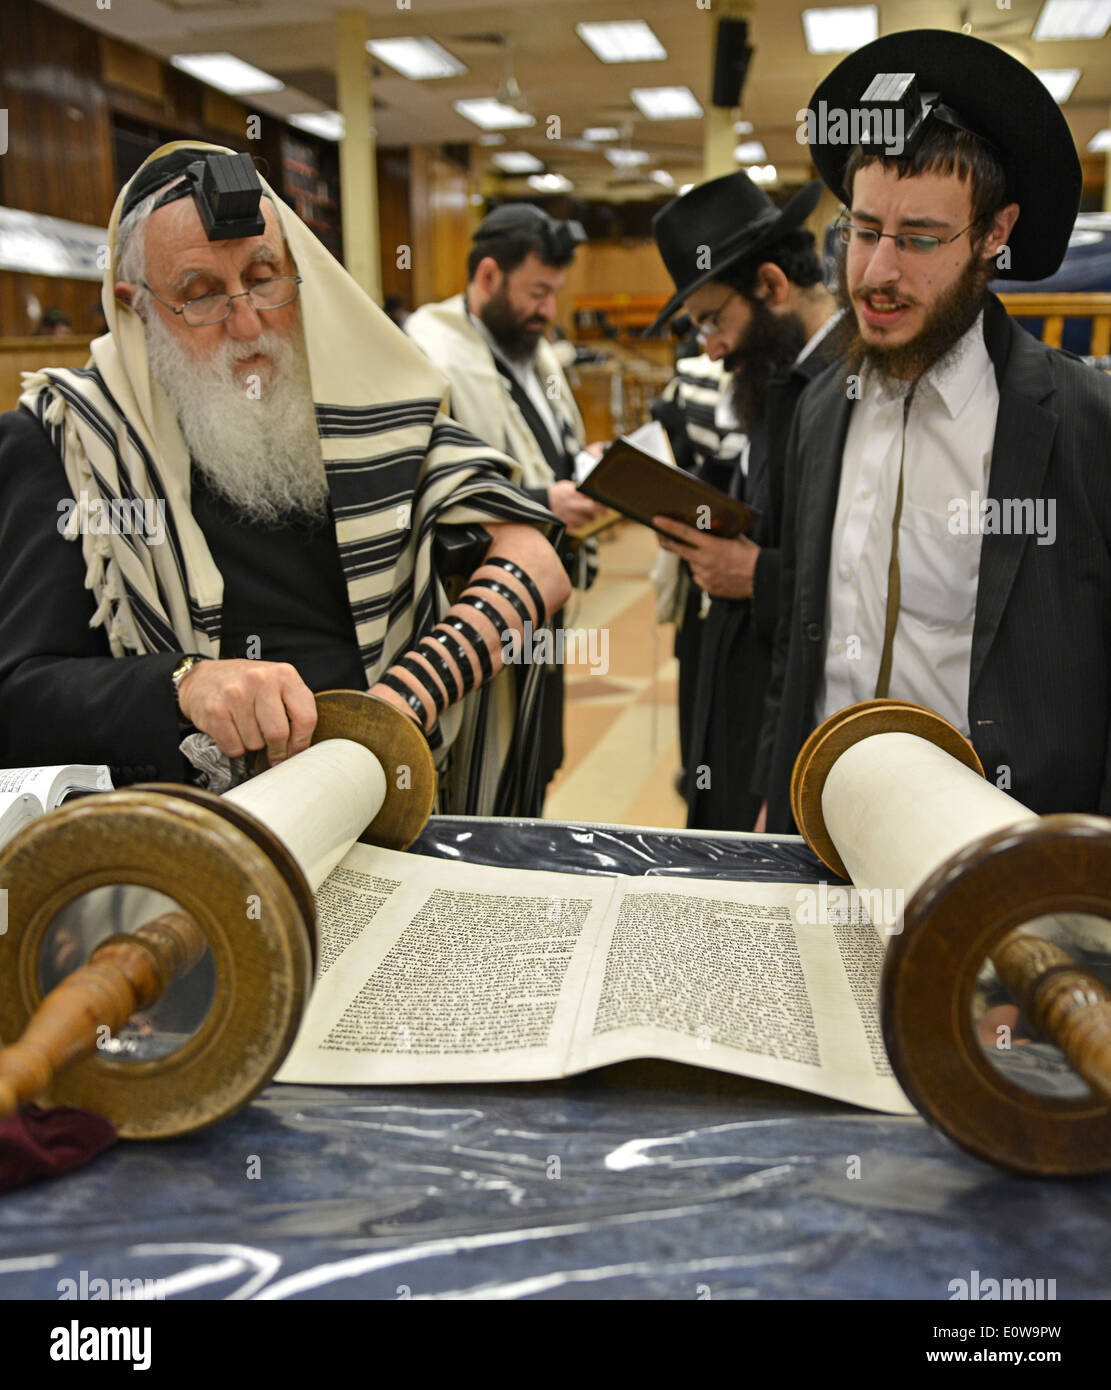 Reading from a Torah scroll at morning services at Lubavitch headquarters in Crown Heights, Brooklyn, New York. Stock Photo